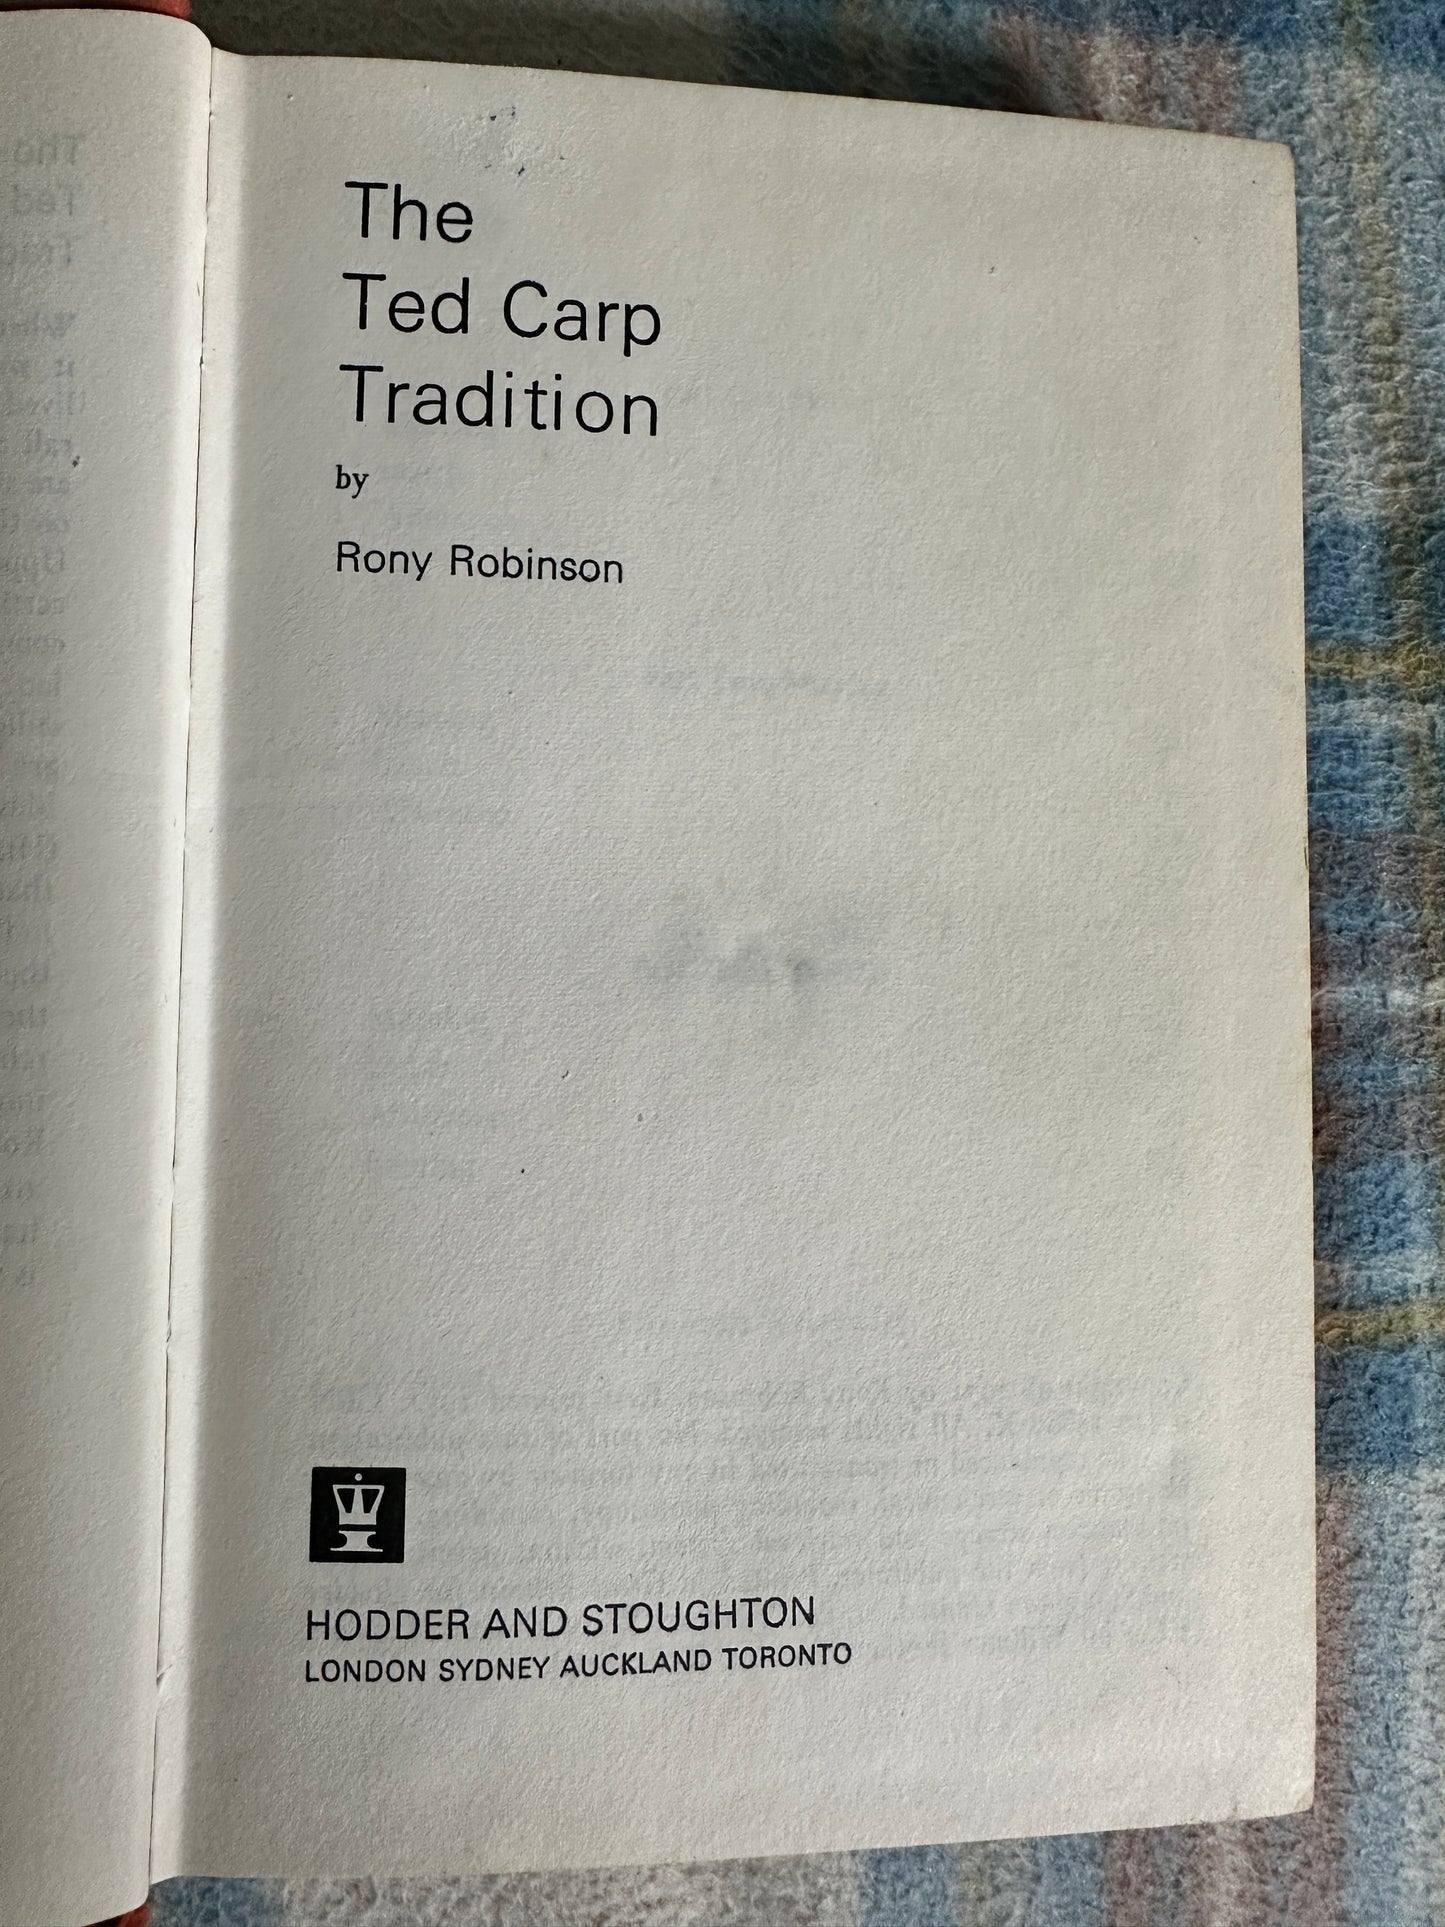 1971*1st* The Ted Carp Tradition - Rony Robinson(Hodder & Stoughton)